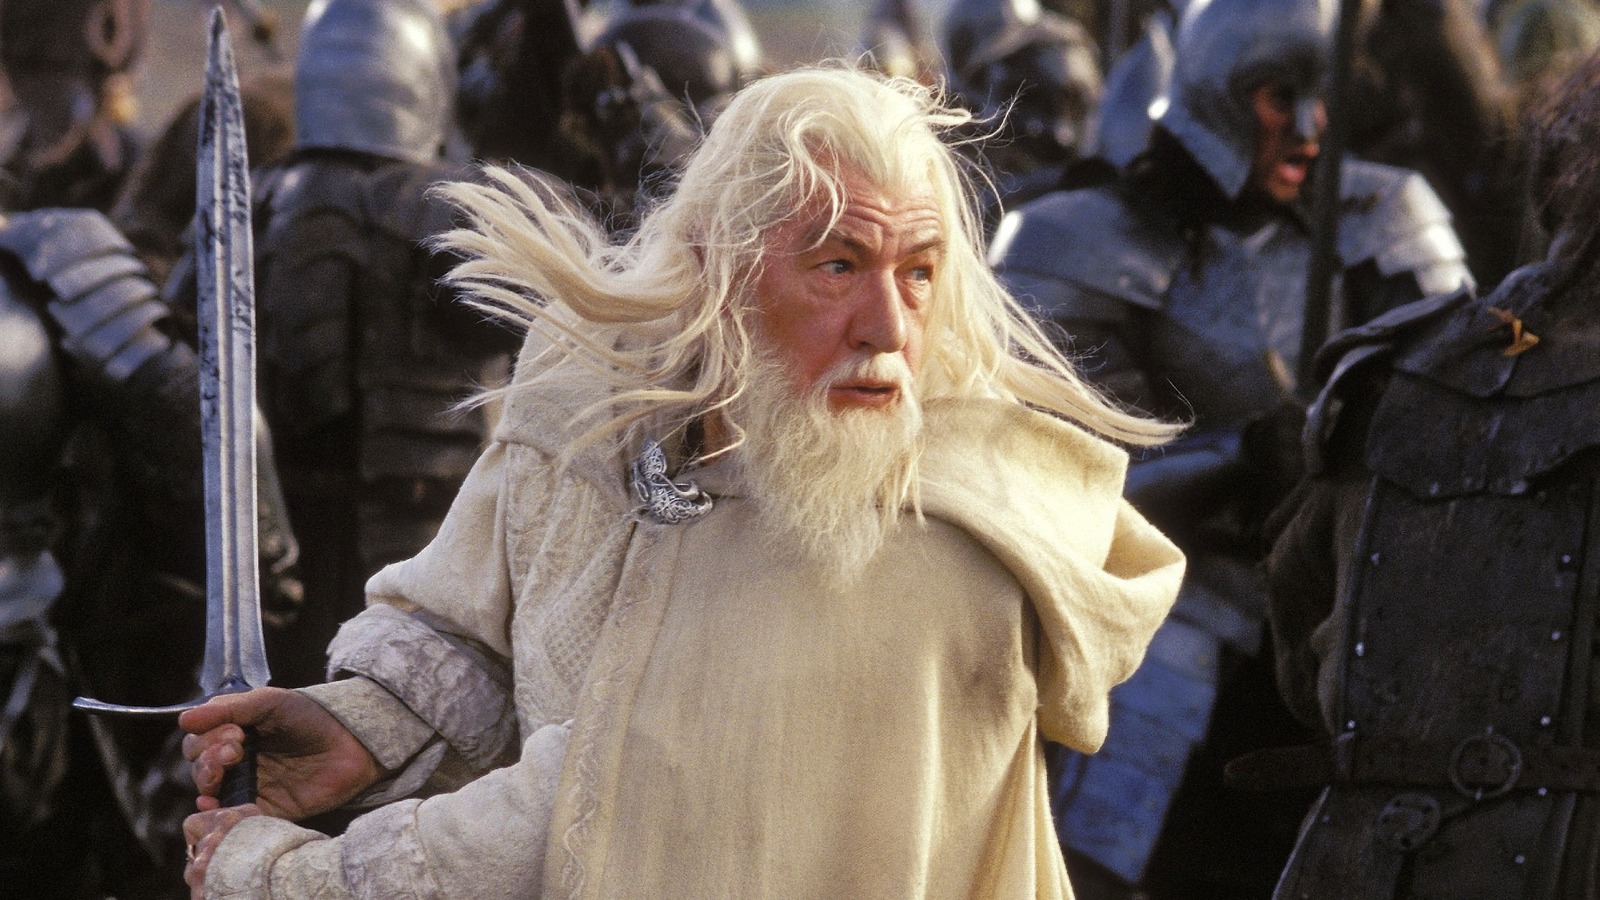 Lord of the Rings: The Fellowship, Ranked By Bravery